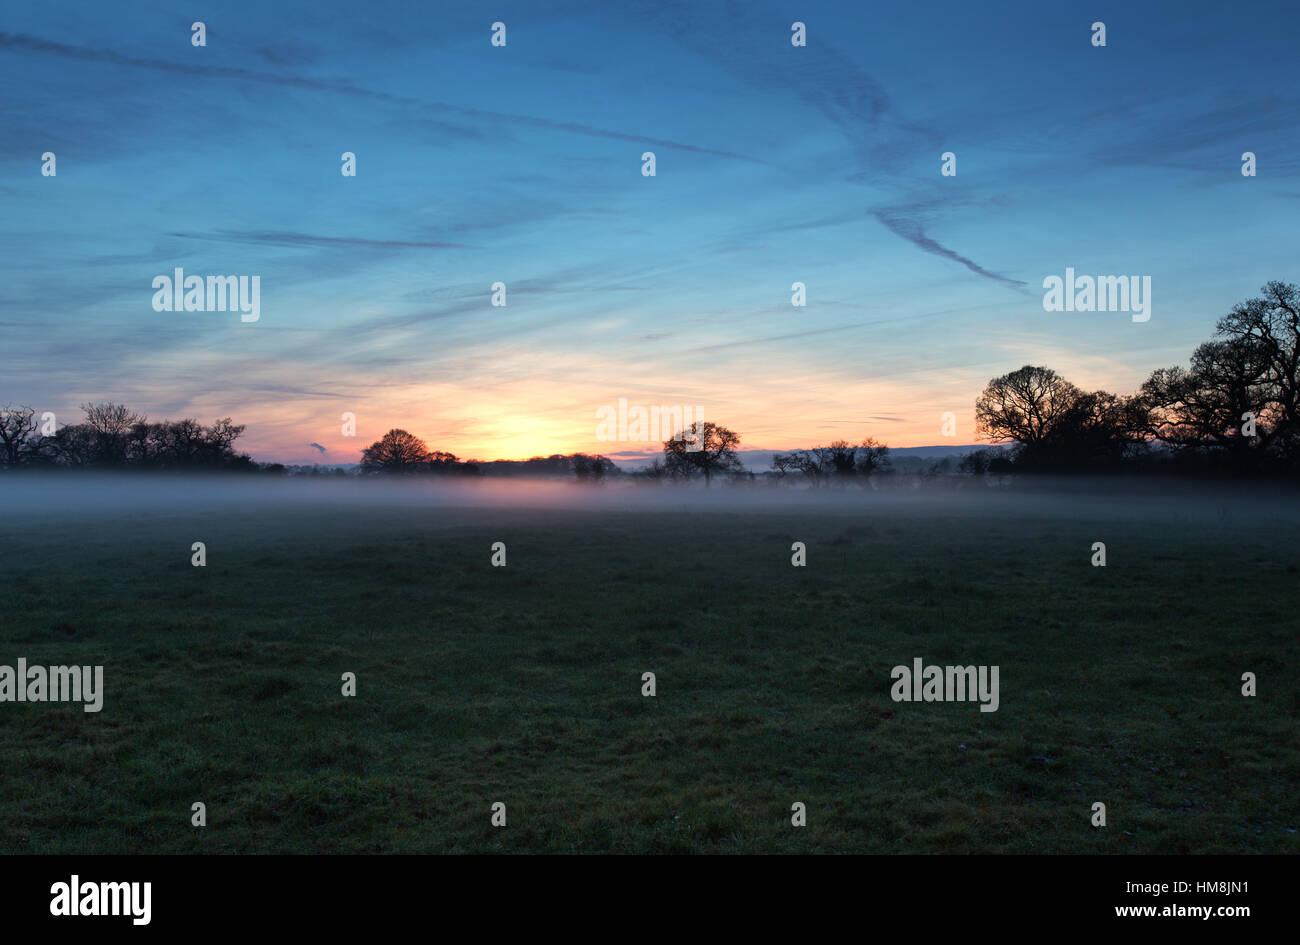 Village of Coddington, England. Picturesque sunset view of mist over a farm field in rural Cheshire. Stock Photo